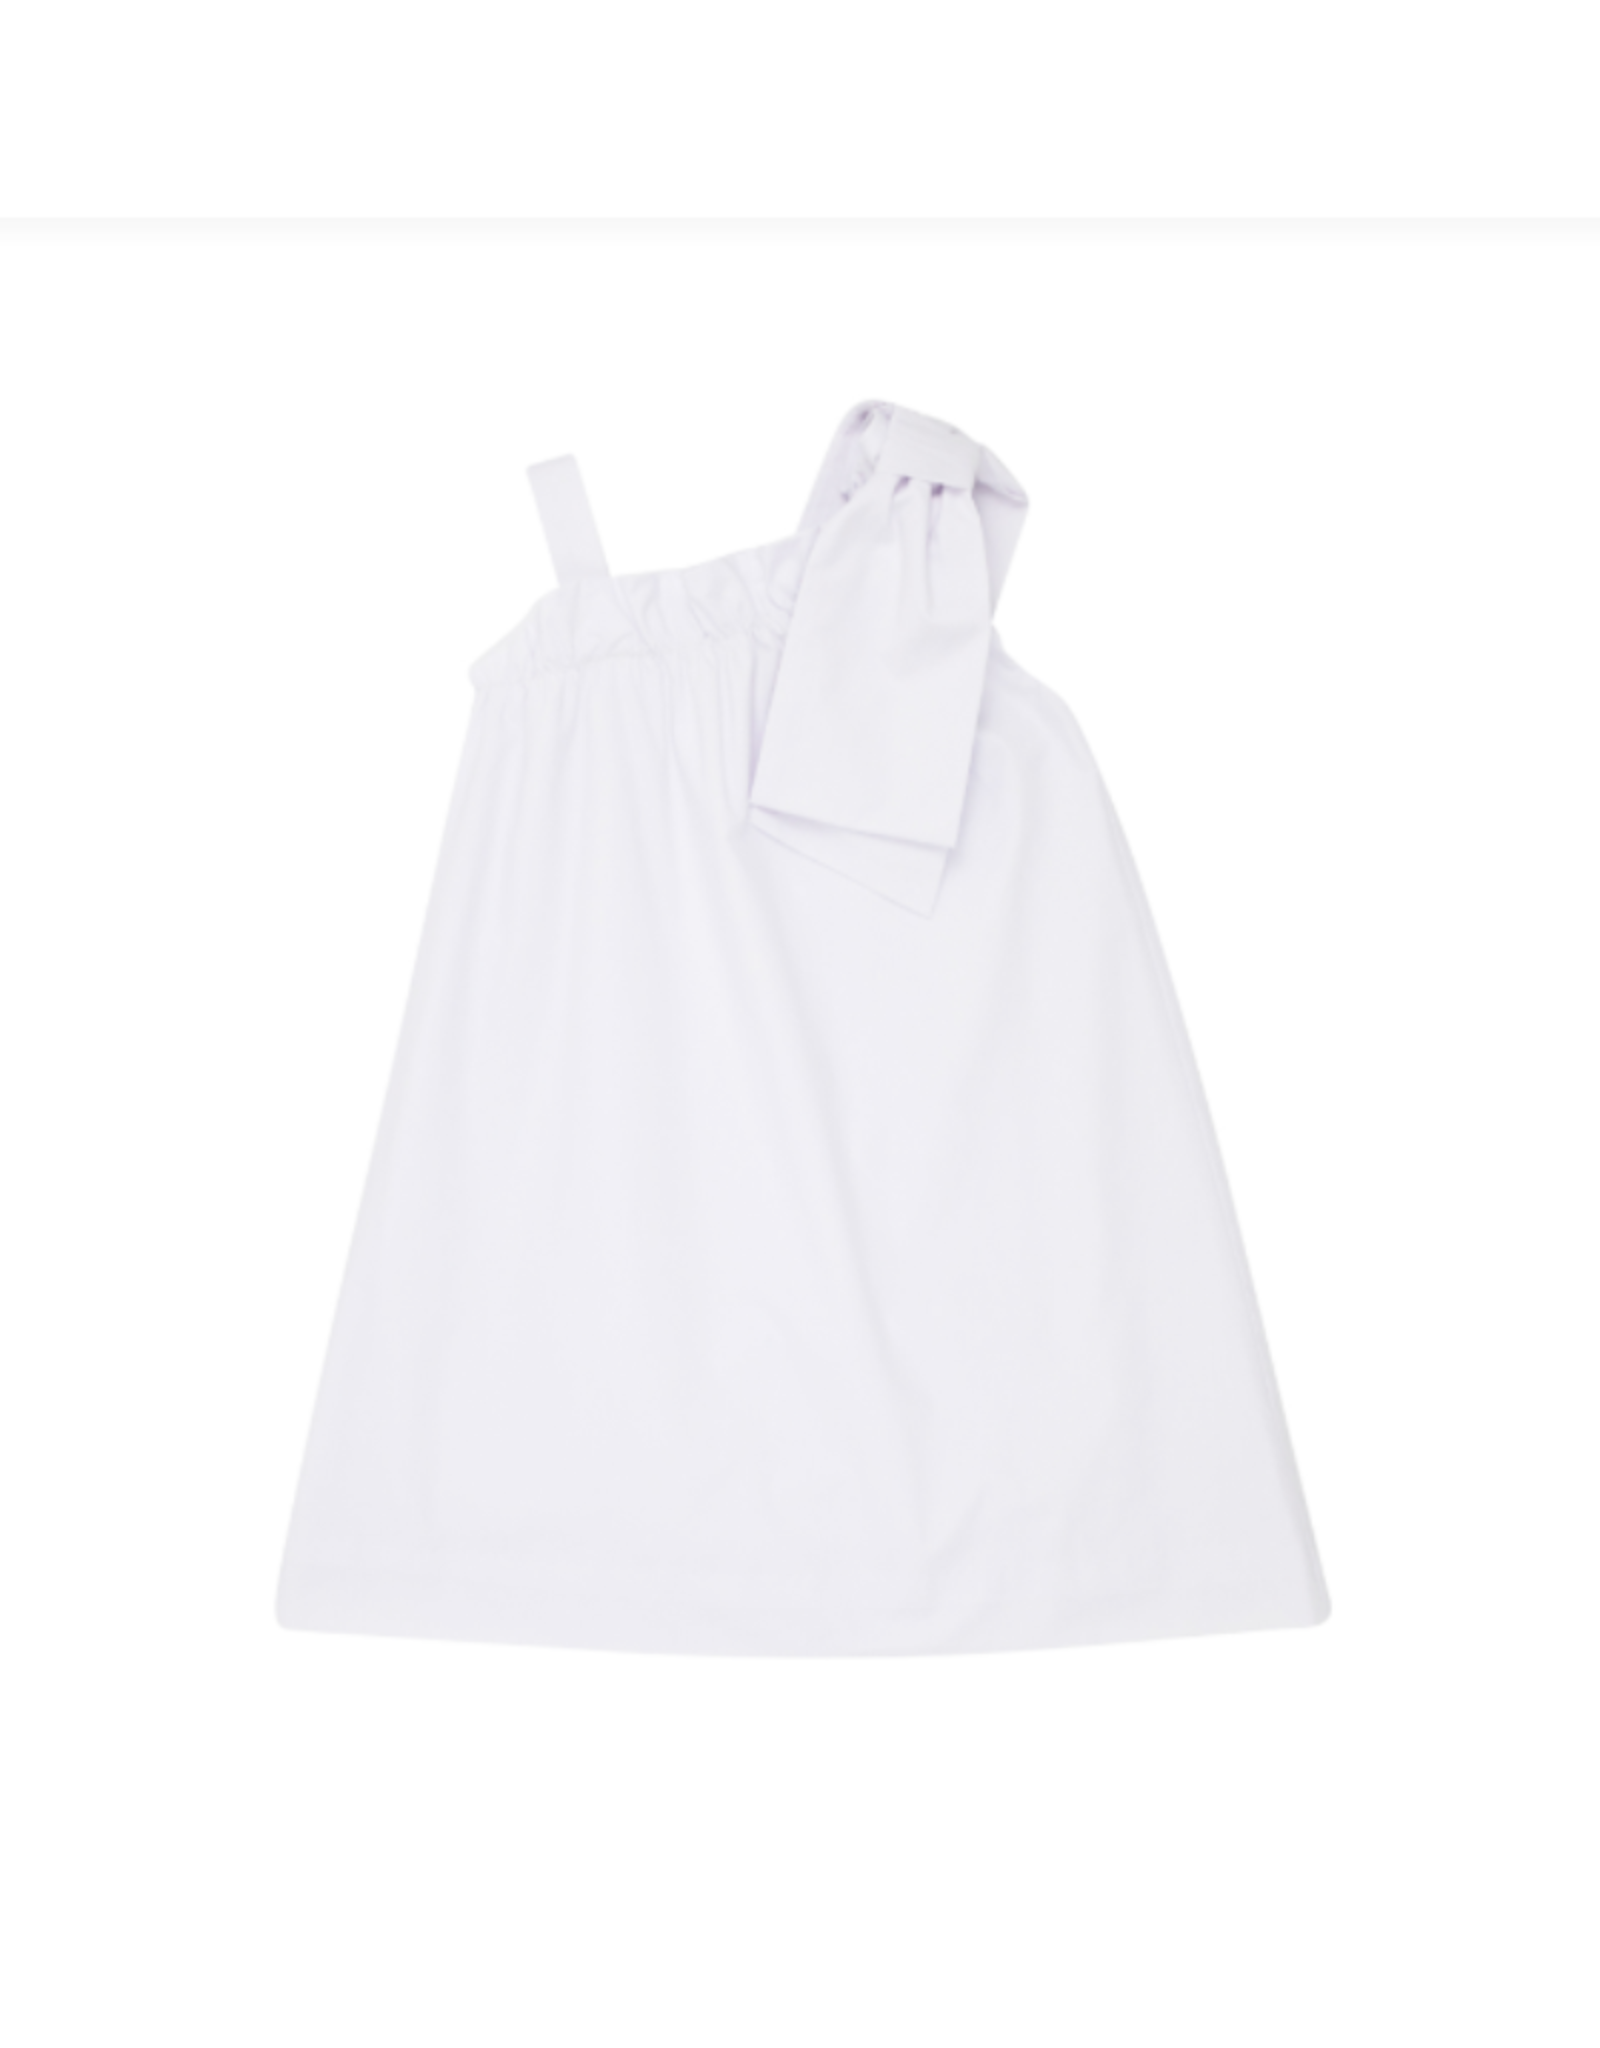 The Beaufort Bonnet Company Maebelle Bow Dress, Worth Ave White